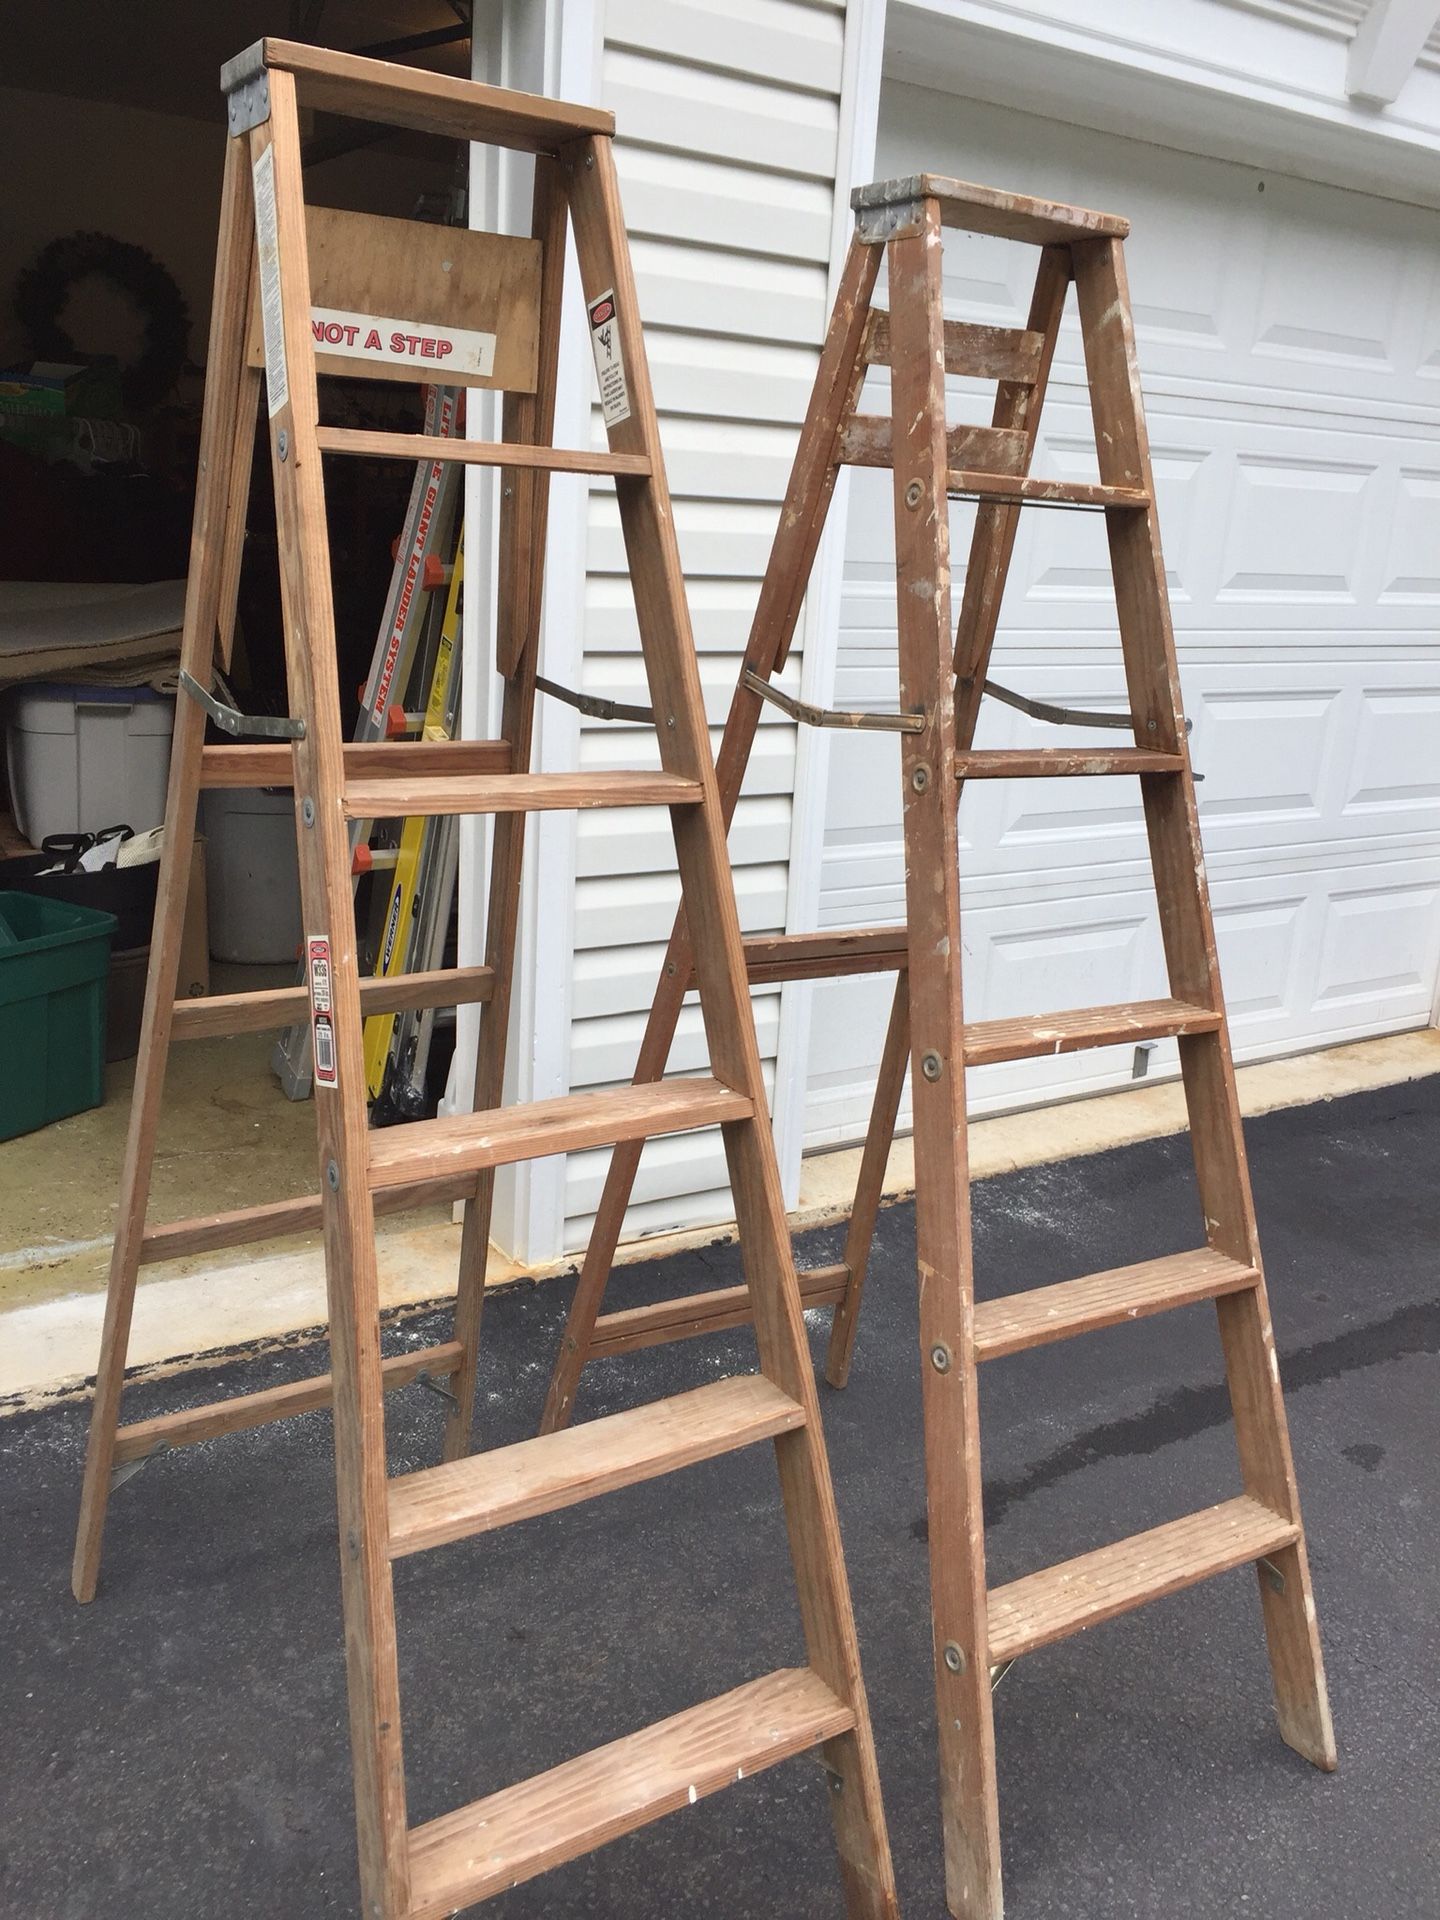 2 ladders $10 for both